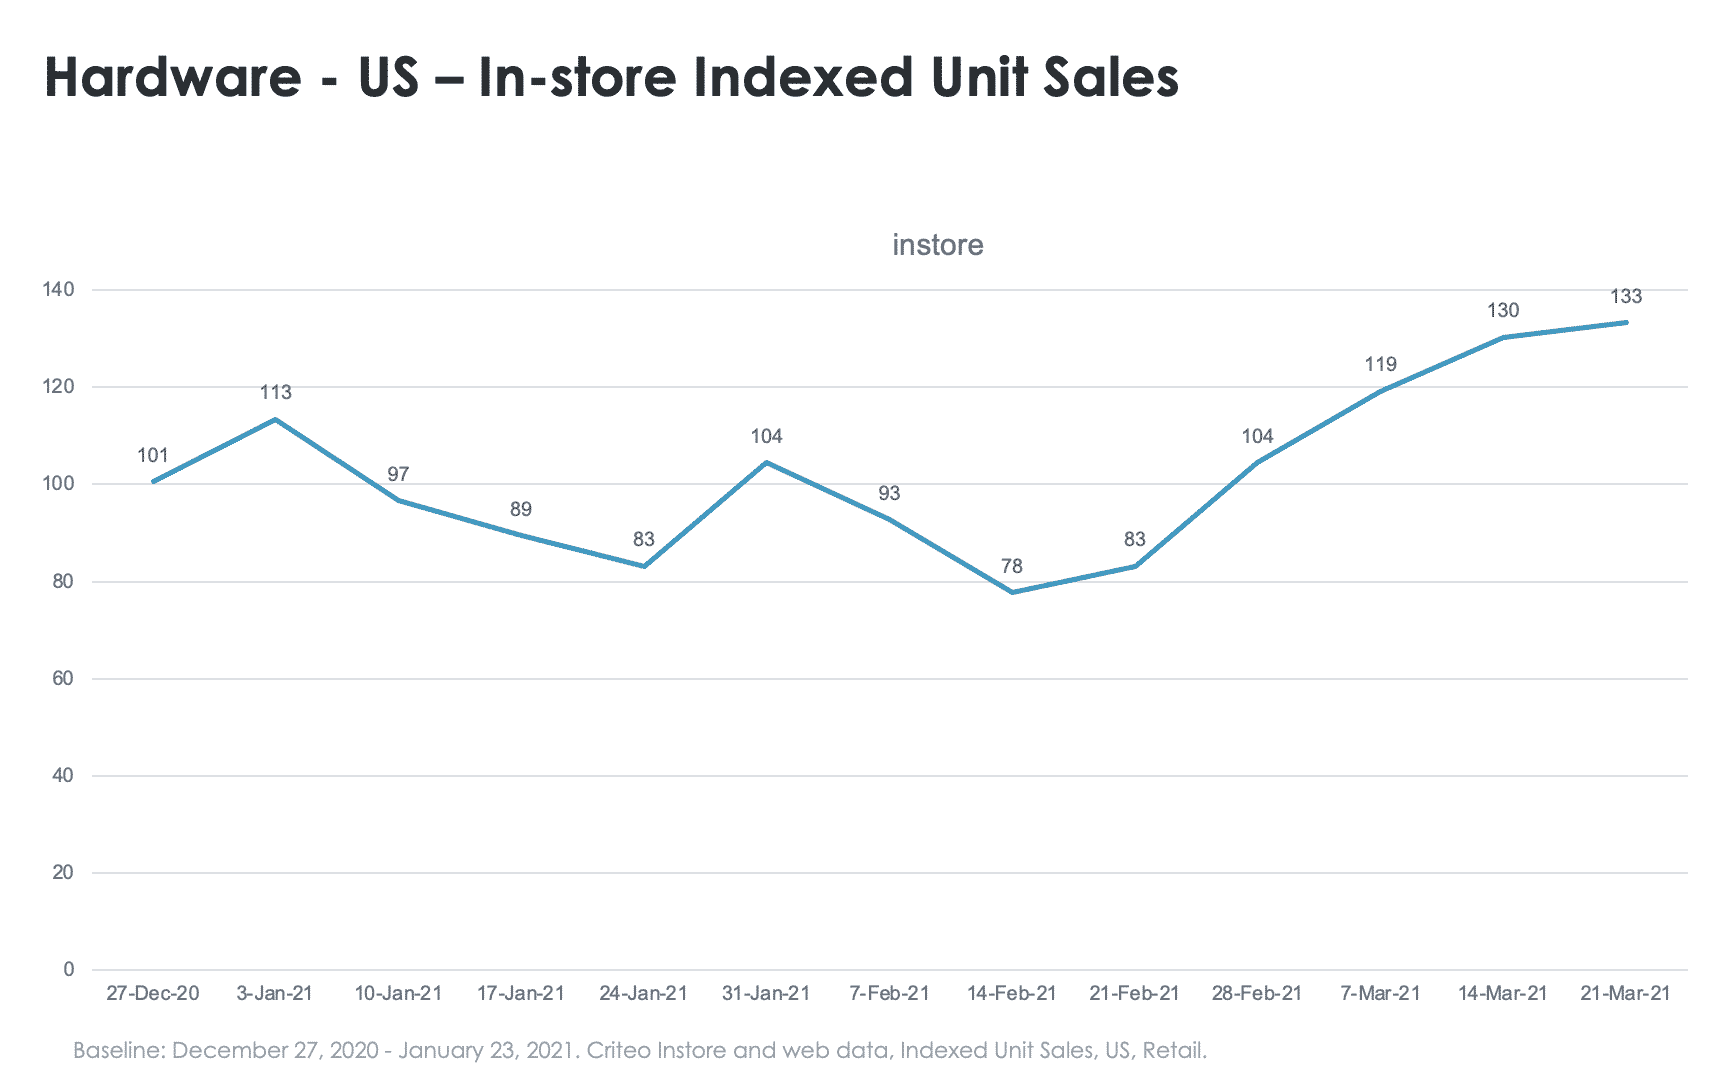 Hardware in-store sales